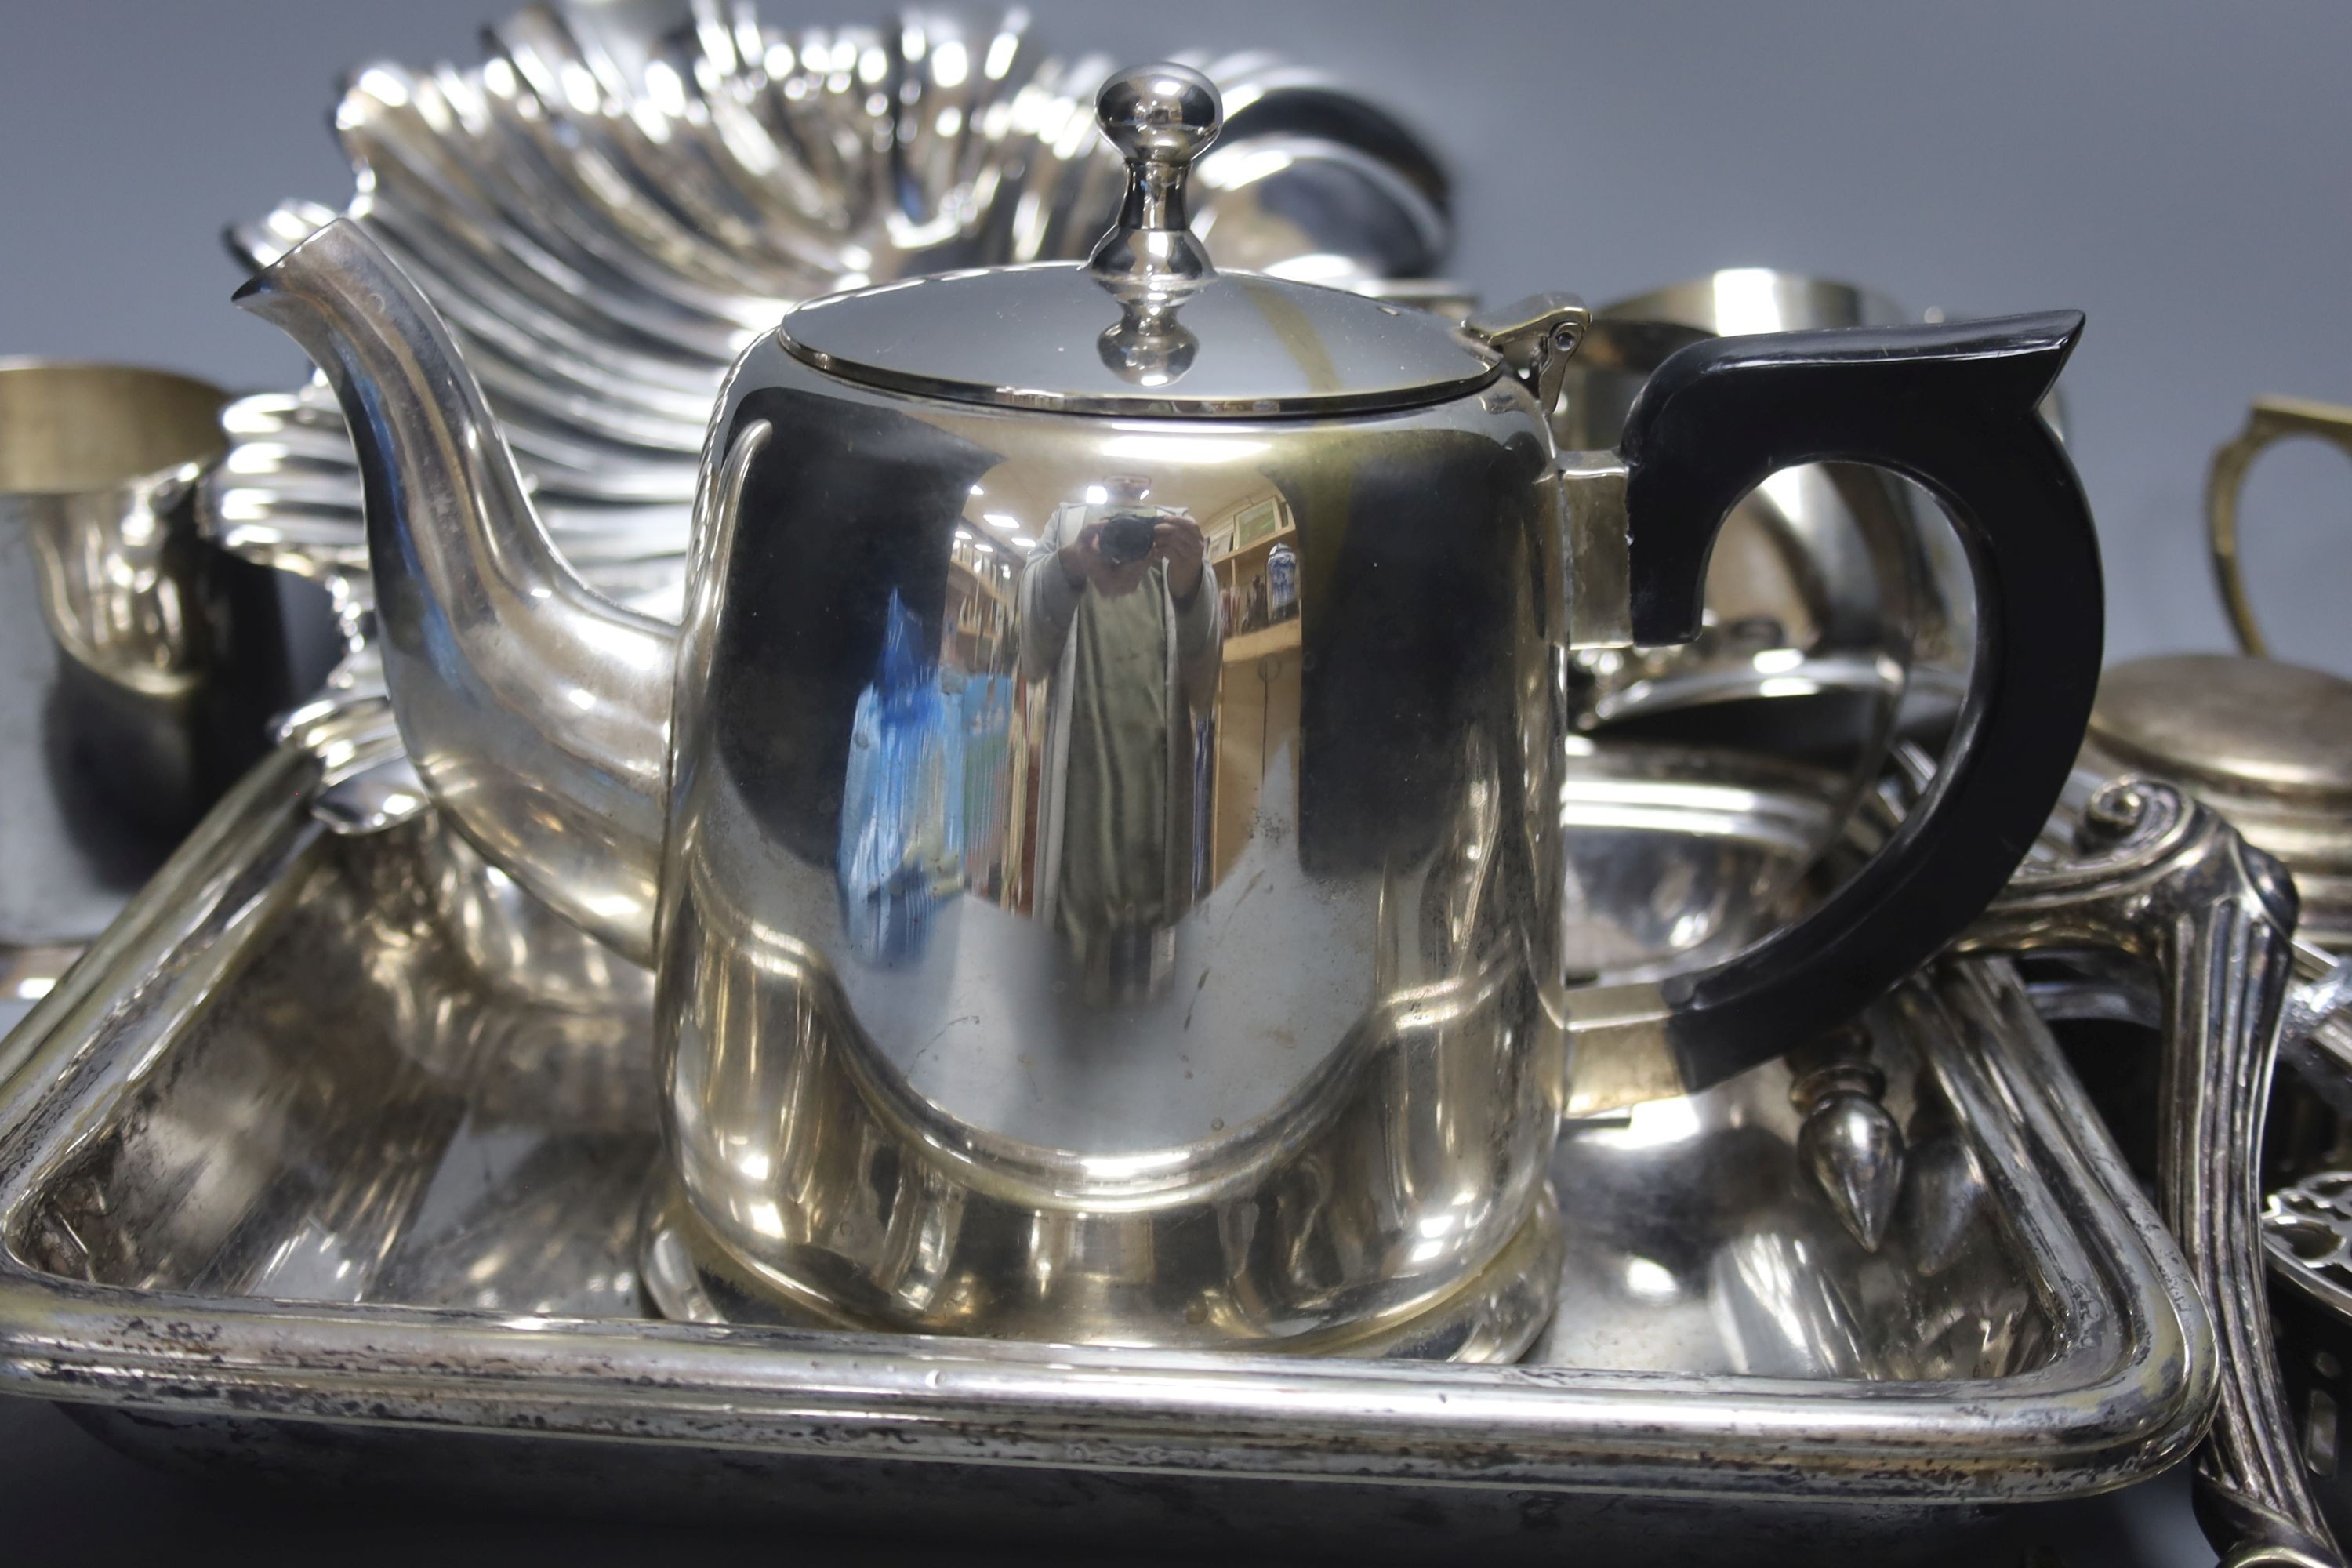 Assorted plated wares including hotel plate, entree dish and cover and claret jug mounts.